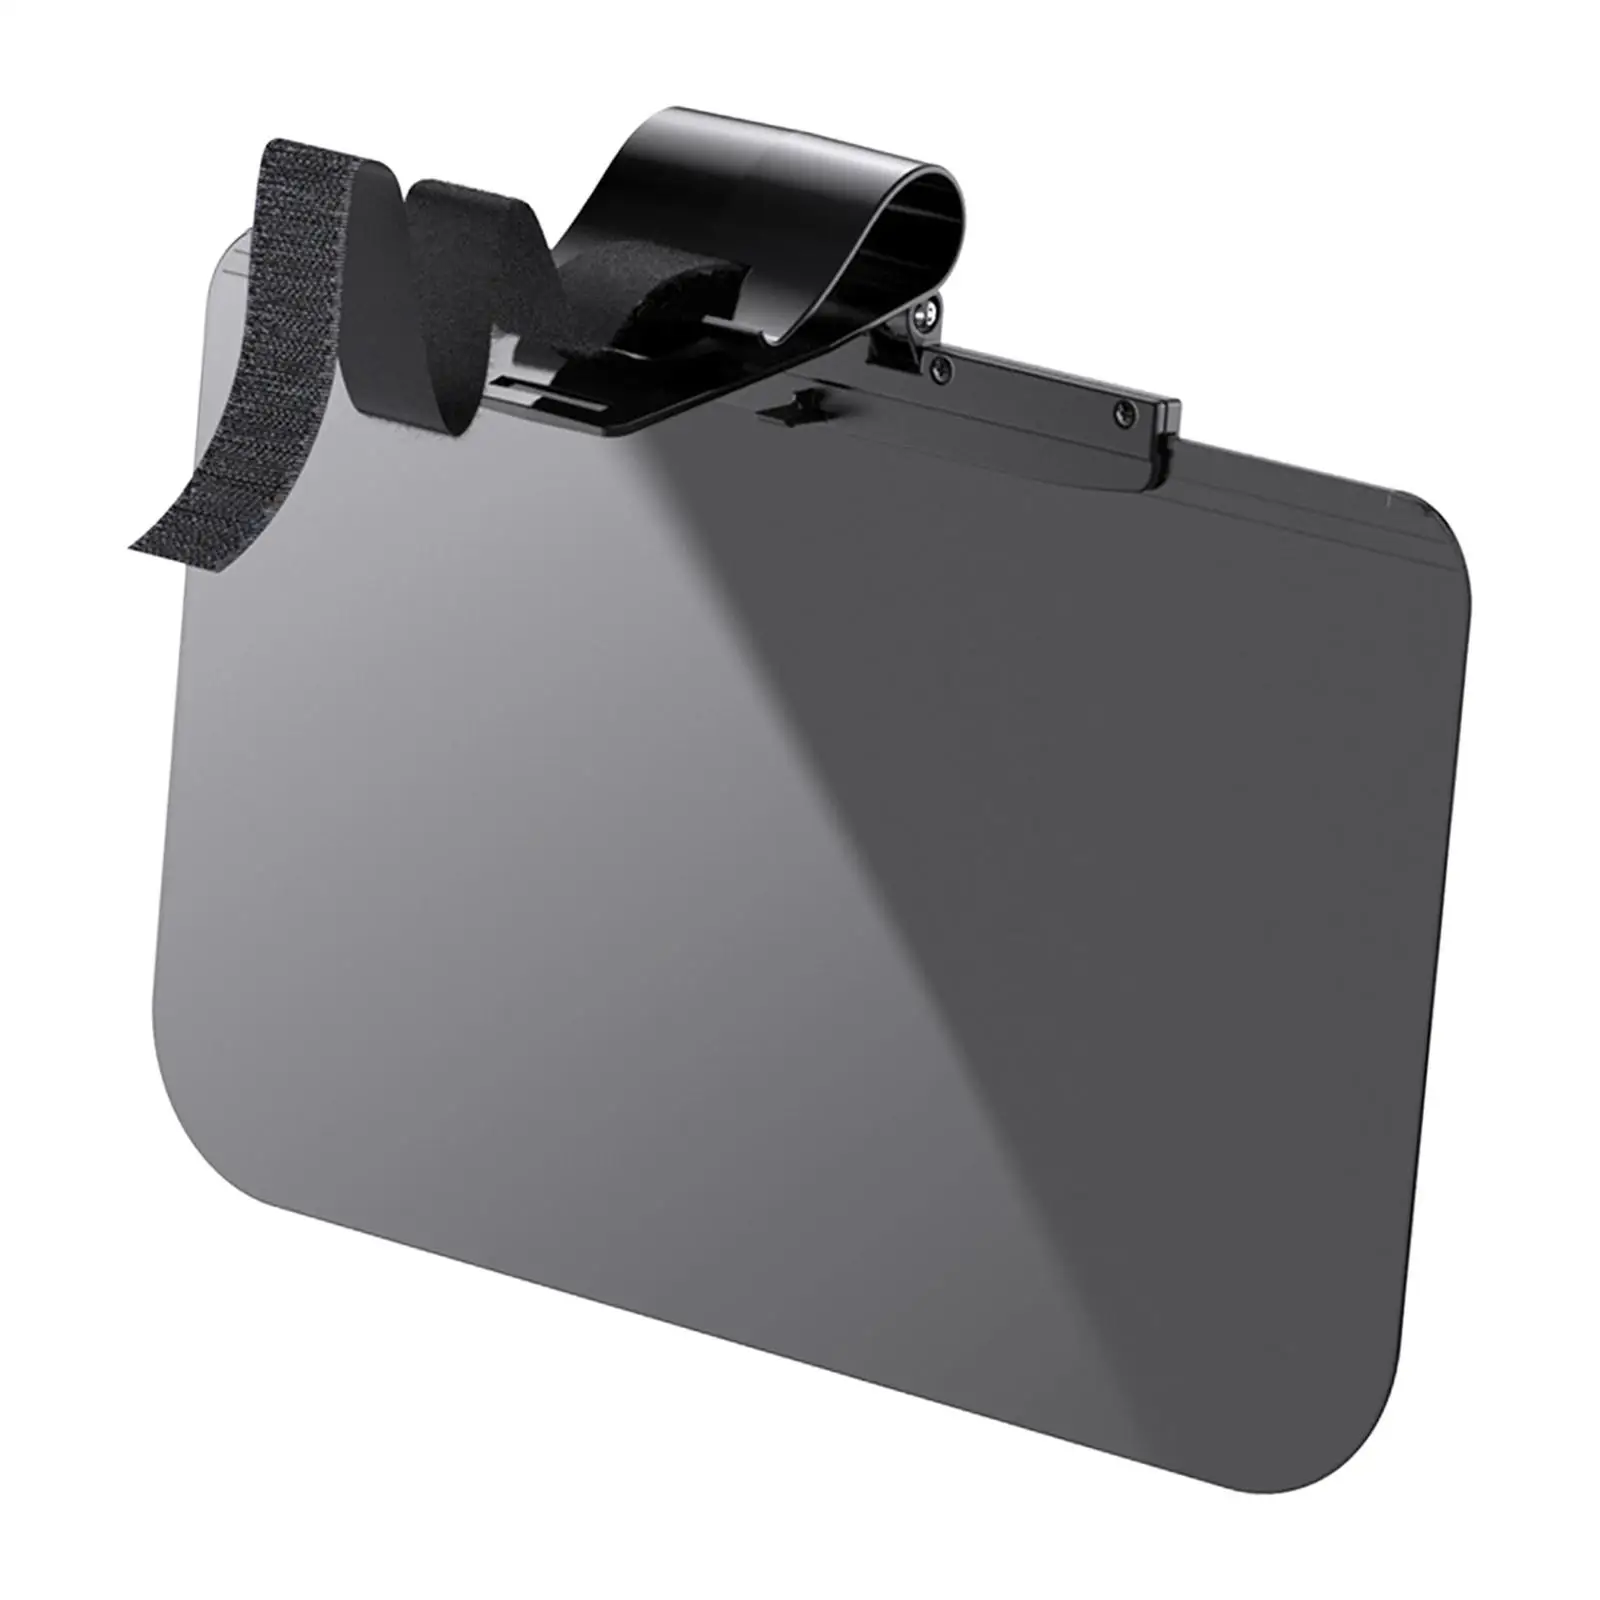 Car Anti Glare Sun Visor Extension Sunshade The Lens Can Move about 100mm Left and Right Vehicle Repair Parts Universal Durable